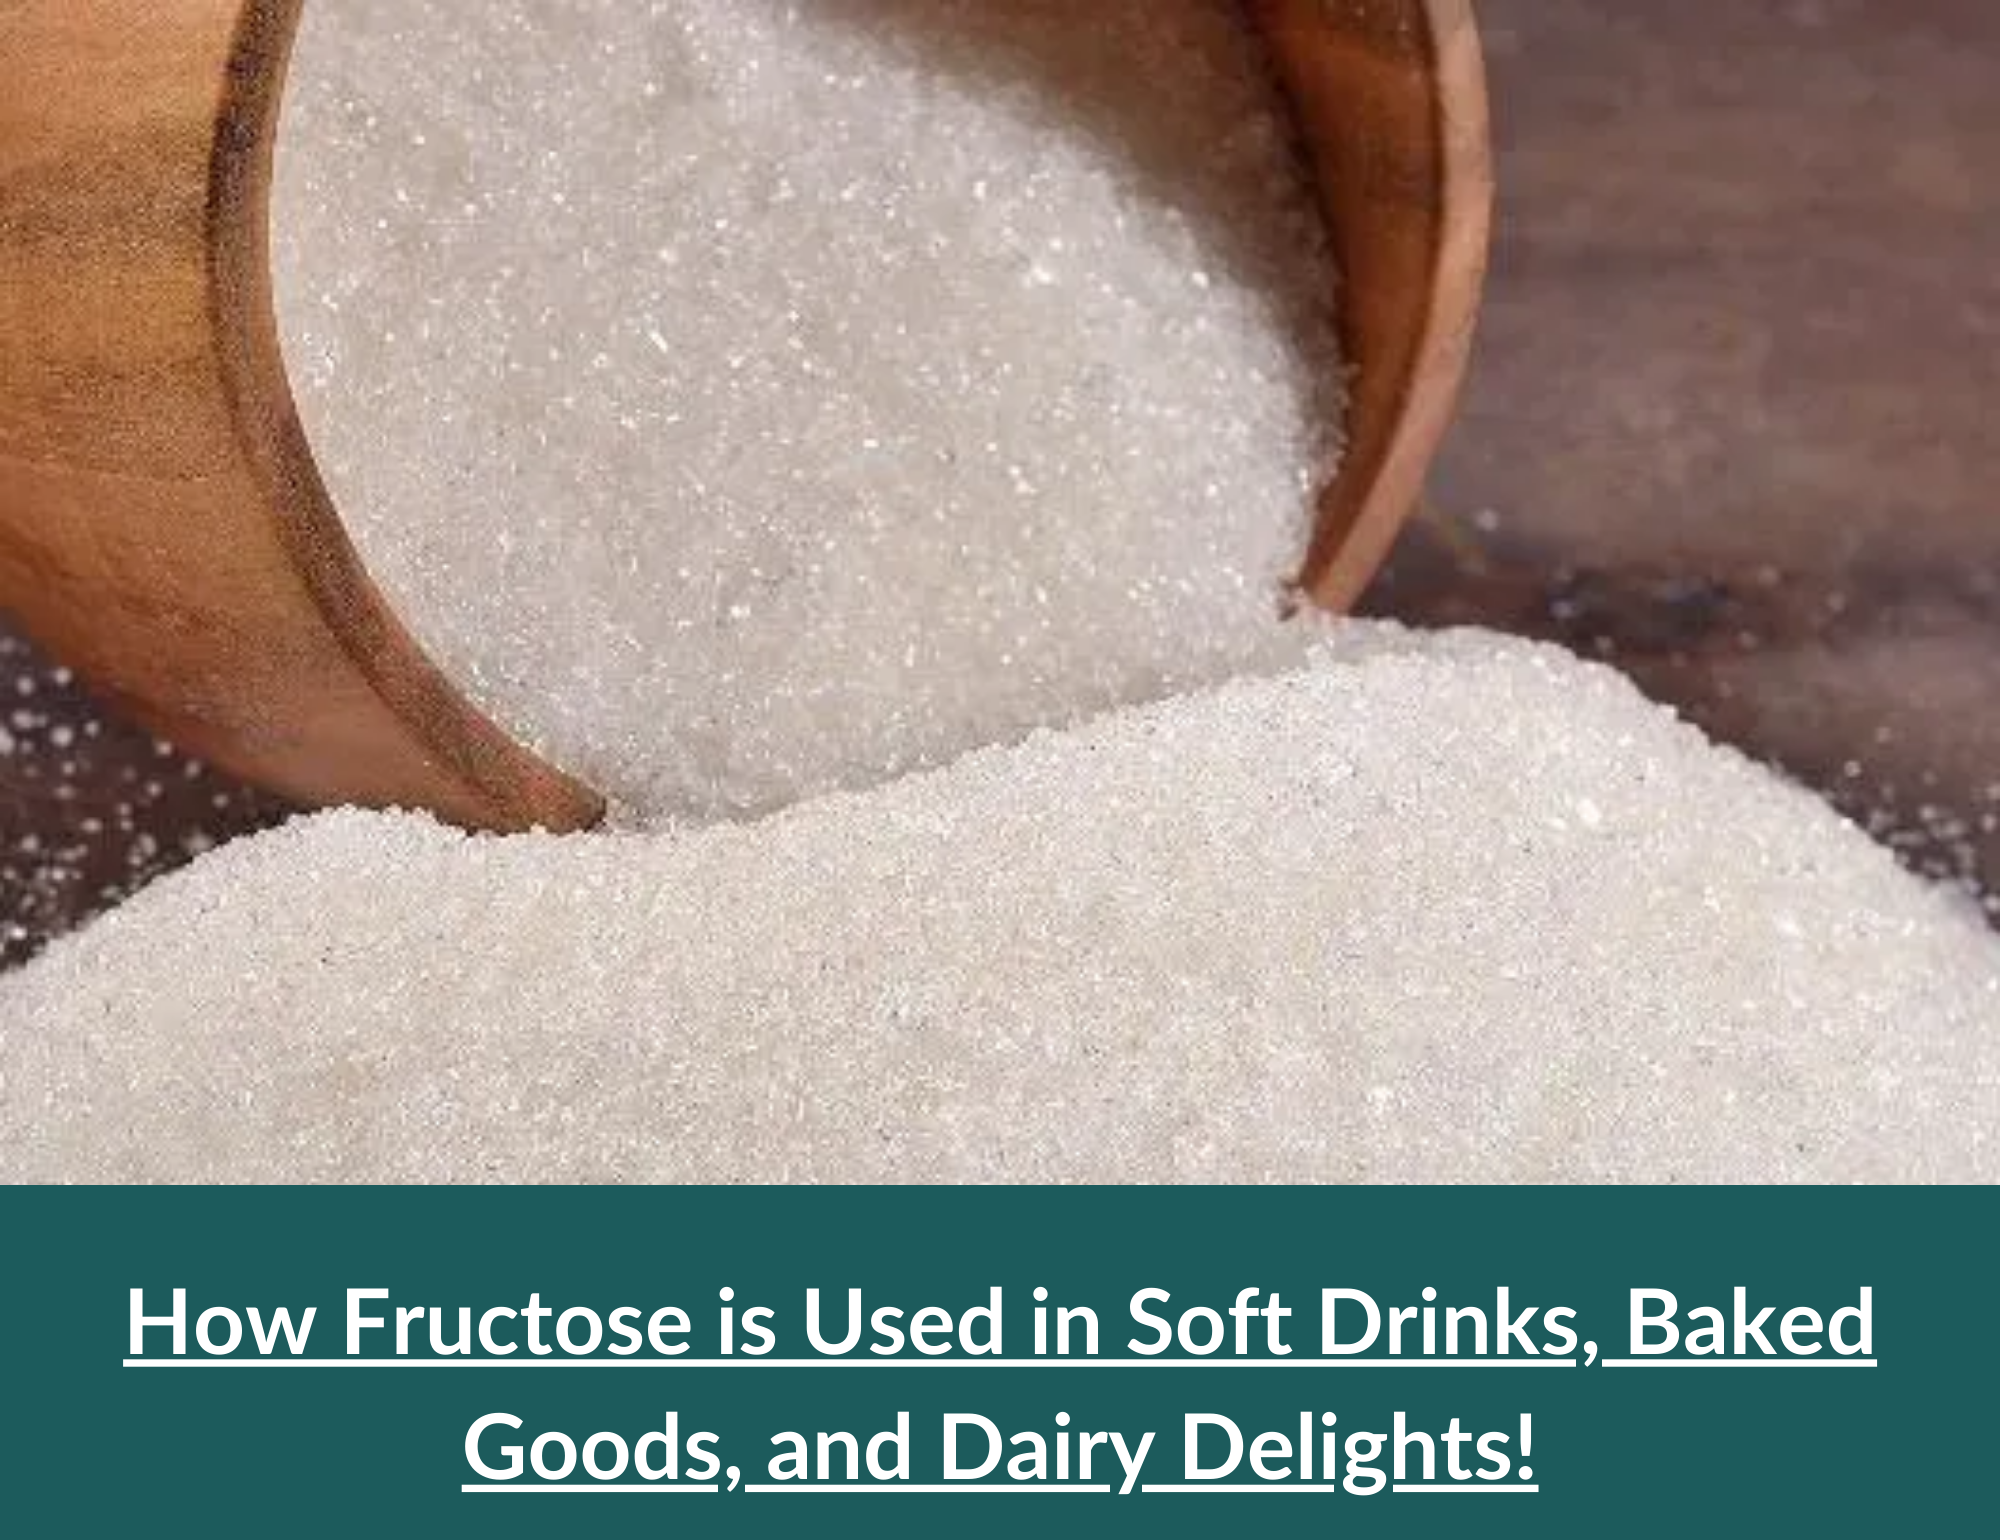 Fructose Food & beverage applications